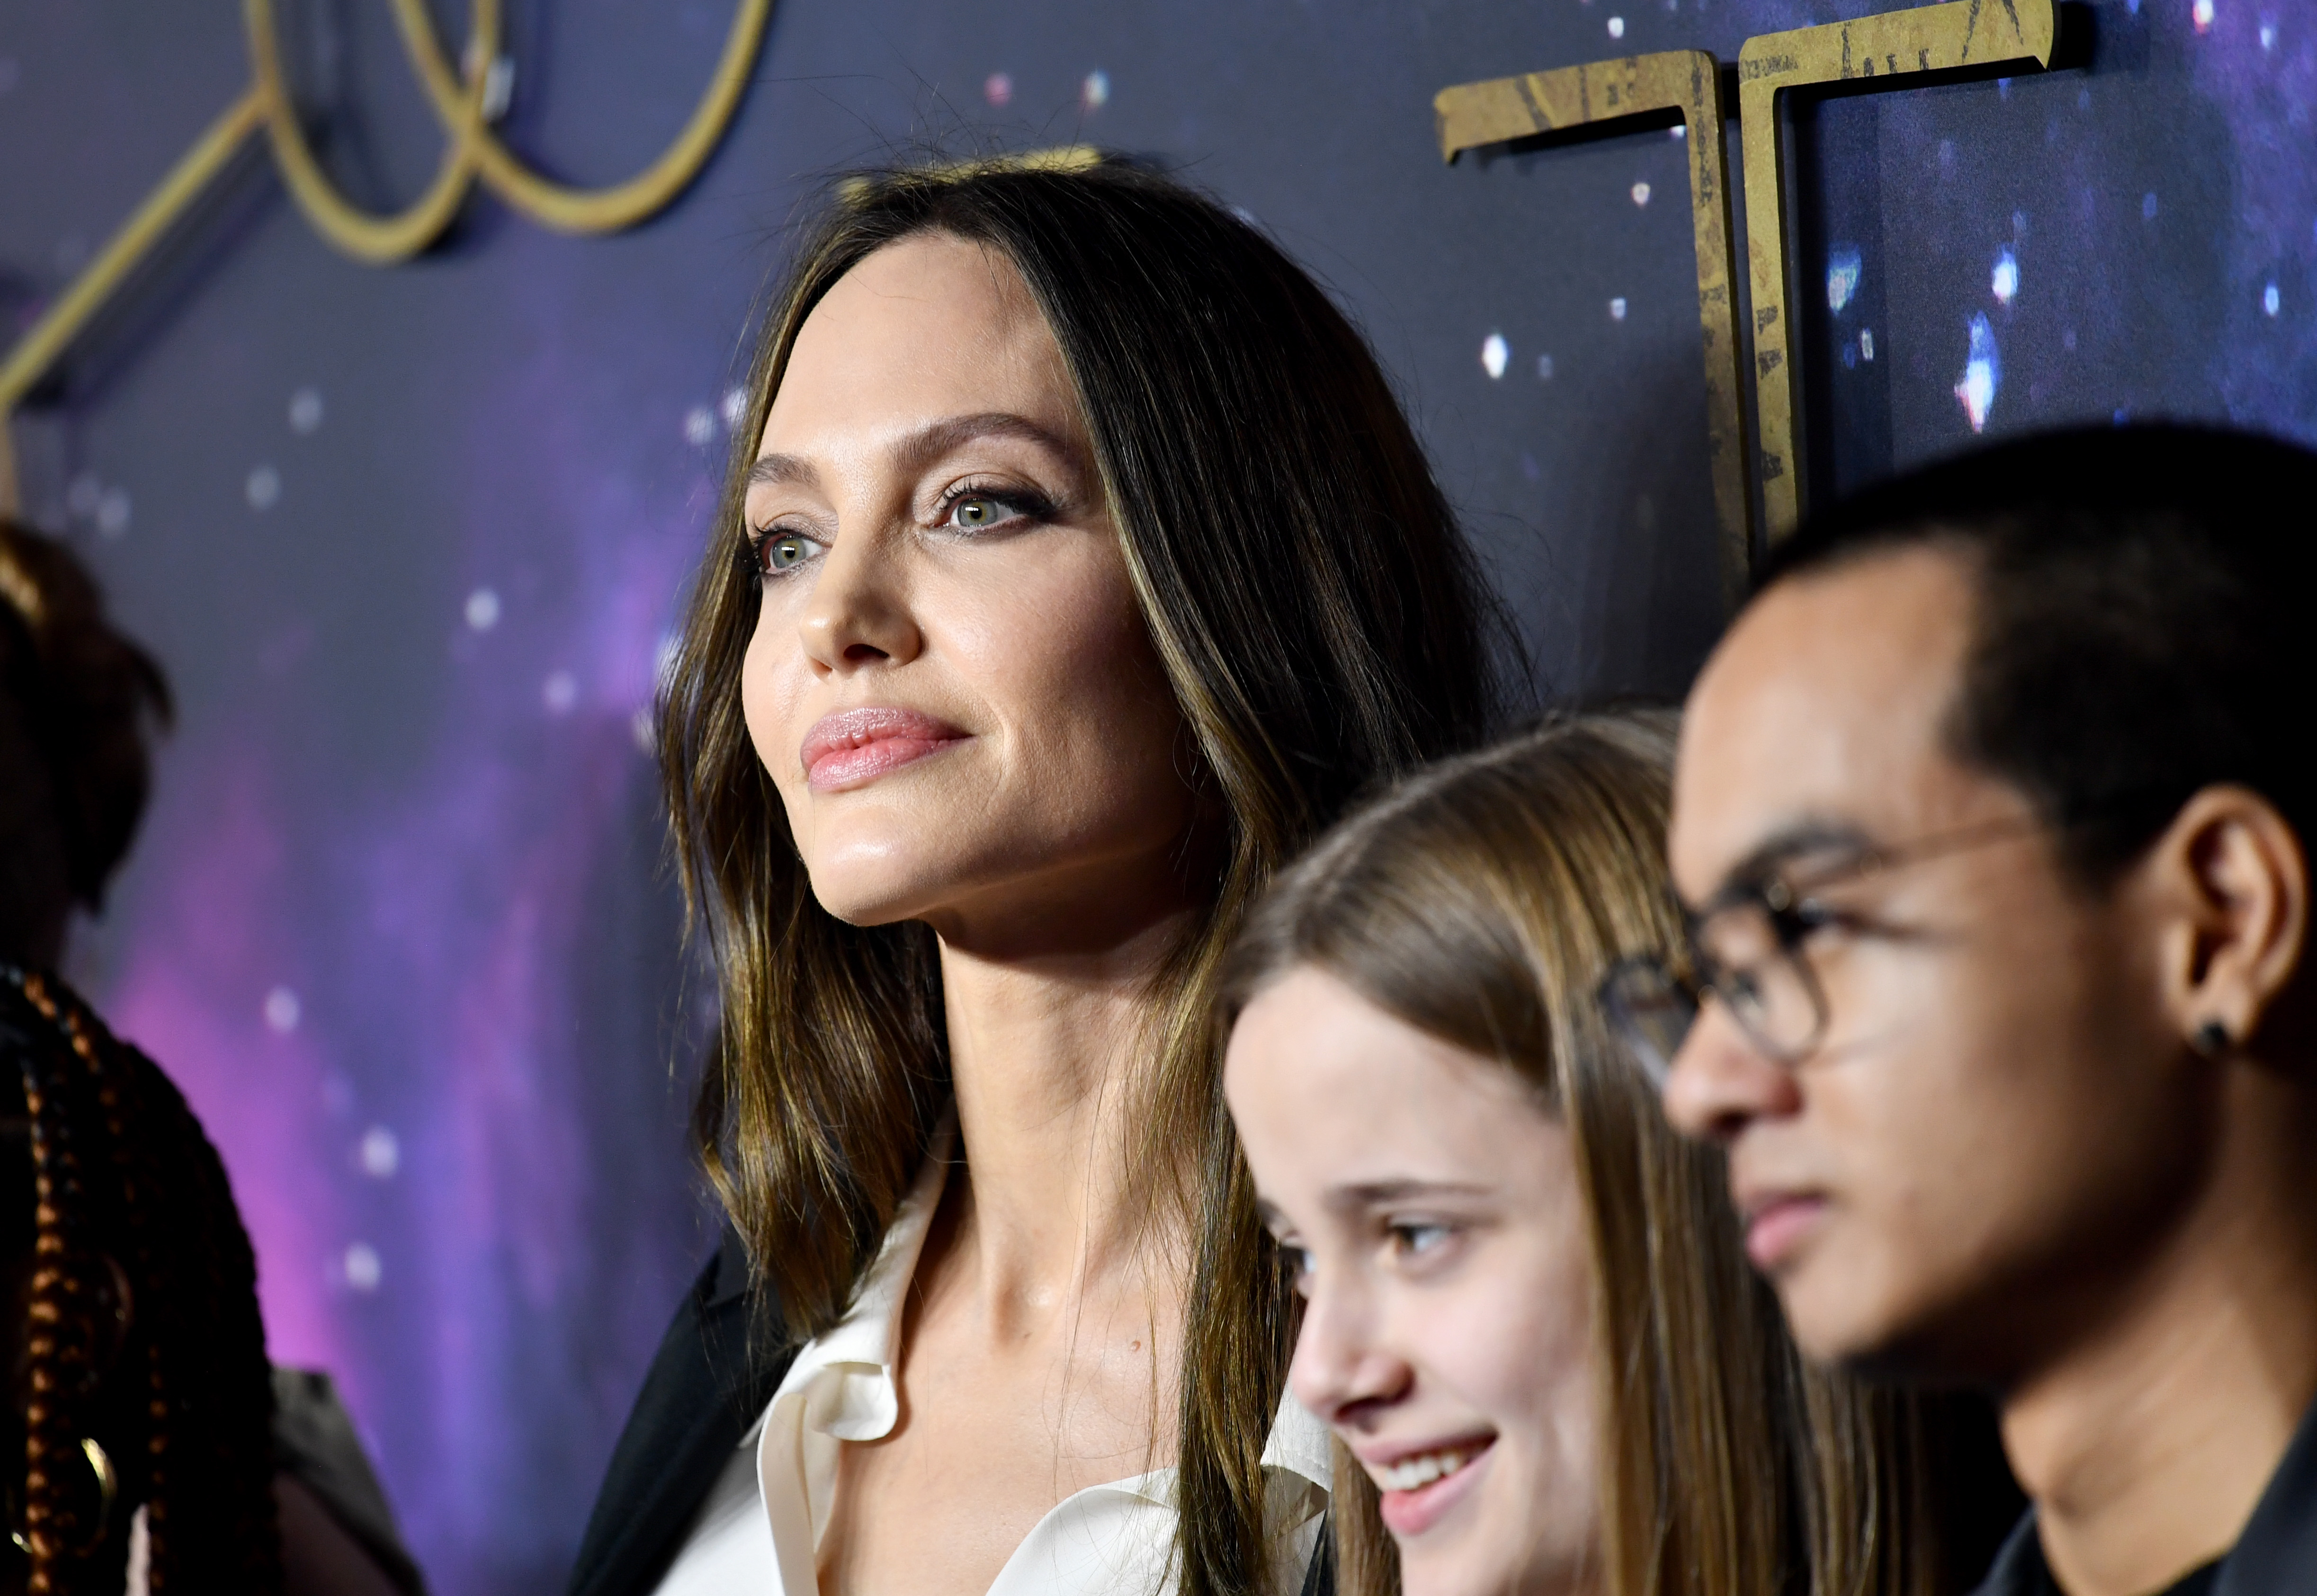 Angelina Jolie, Vivienne Jolie-Pitt and Maddox Jolie-Pitt at the UK Gala screening of Marvel Studios' "Eternals" at BFI IMAX Waterloo on October 27, 2021 in London, England | Source: Getty Images